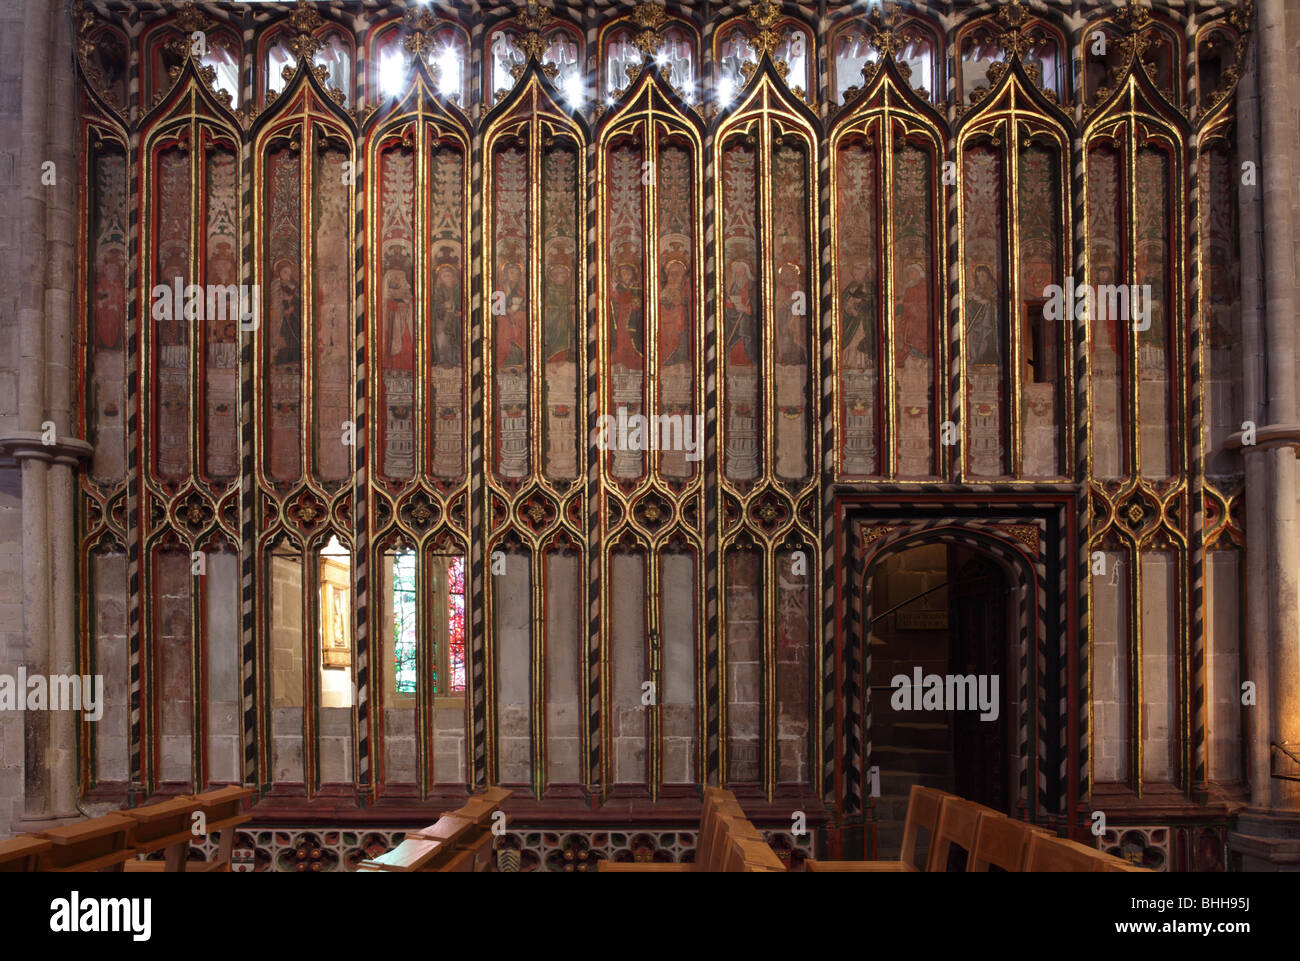 Religious screen in the Lady Chapel on the south side of the Lady Chapel at Hereford Cathedral,doorway to The Chantry. Stock Photo